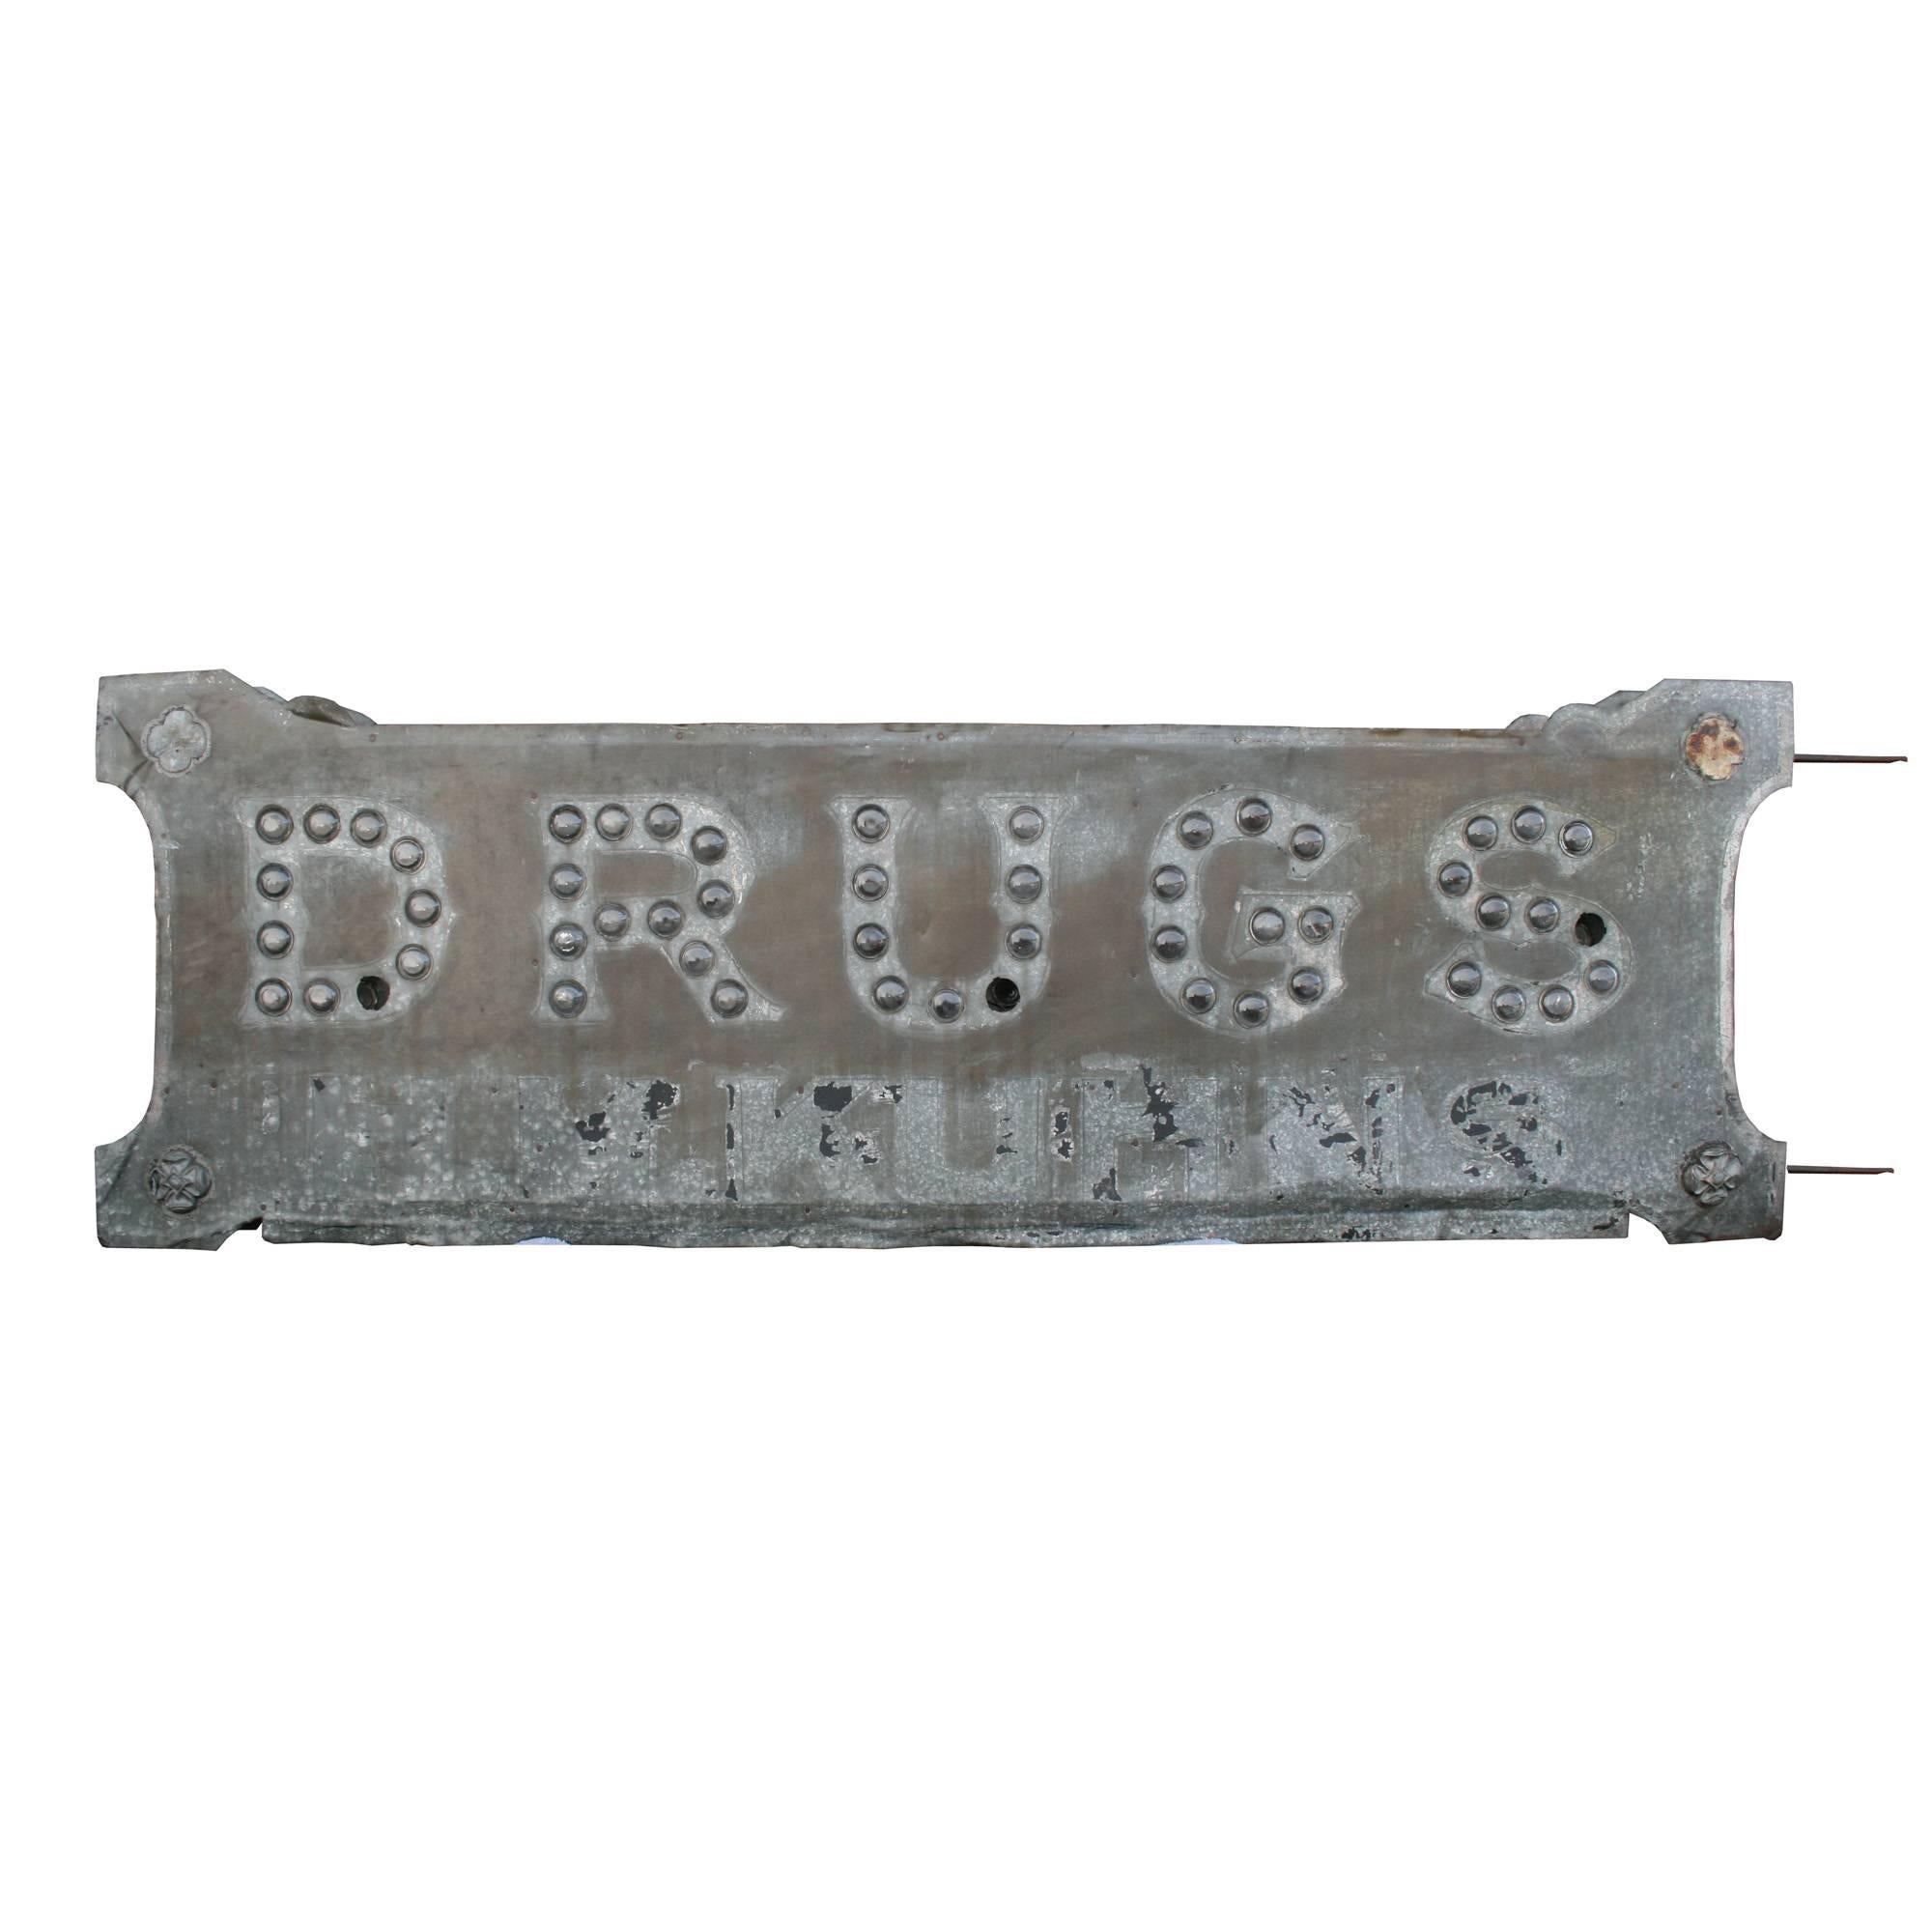 Made from sheets of beautifully patinaed zinc, this early-century drugs sign has so many stunning attributes: the 2